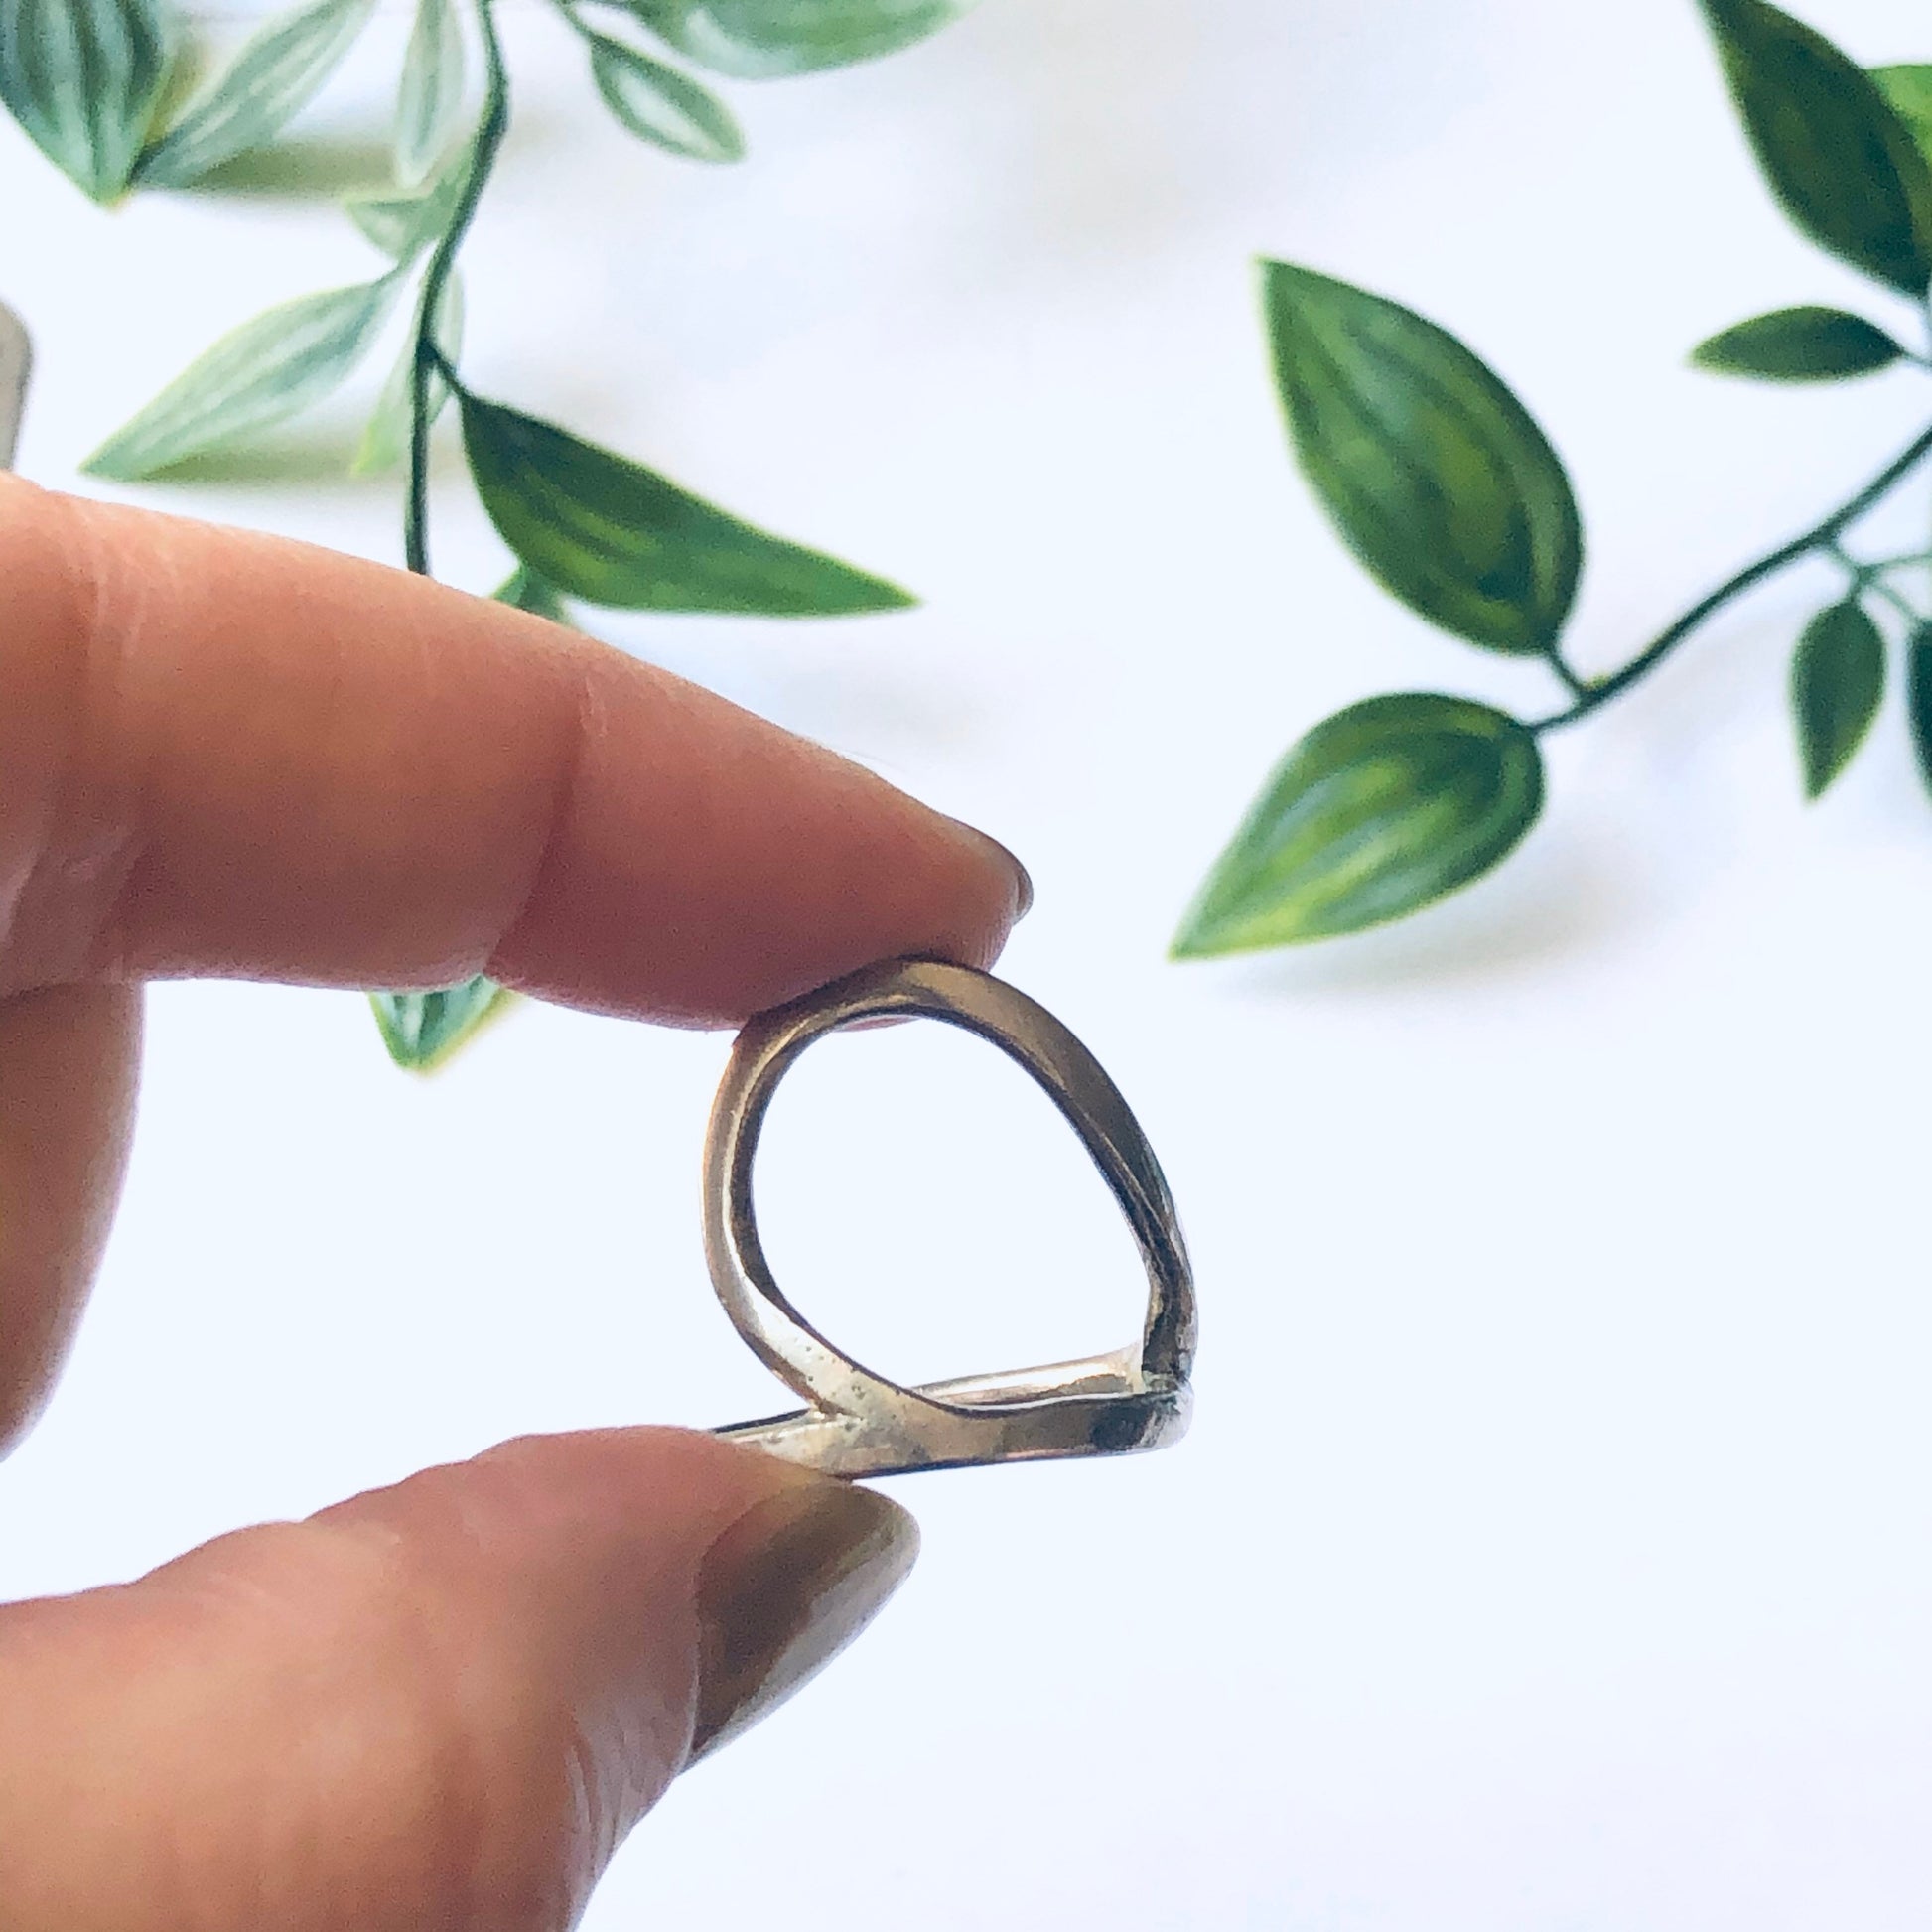 Vintage silver cut out ring with minimalist style and abstract design, held between fingers against a white background with green leaves.